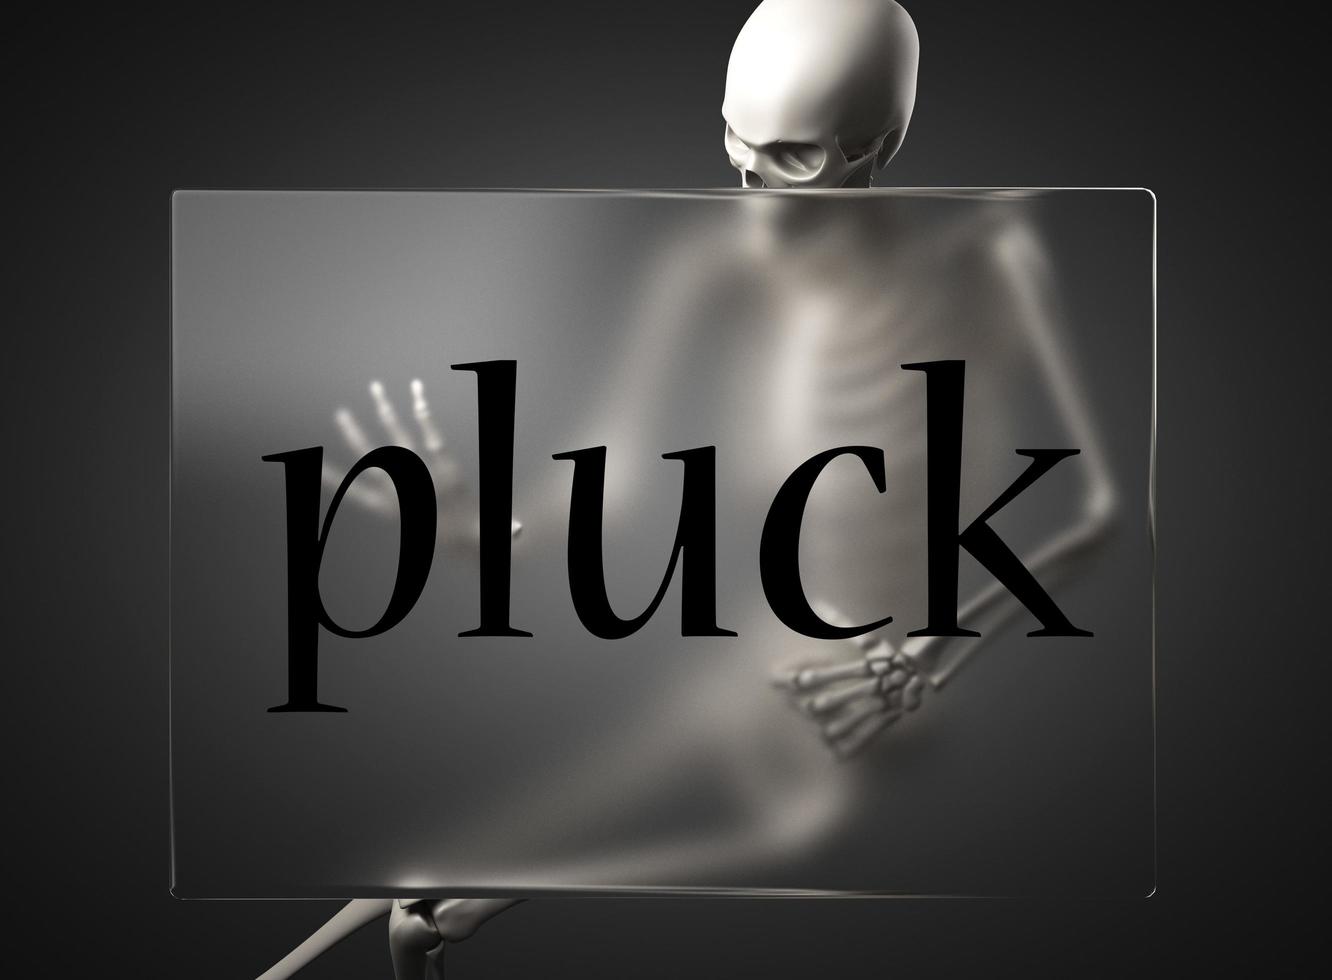 pluck word on glass and skeleton photo